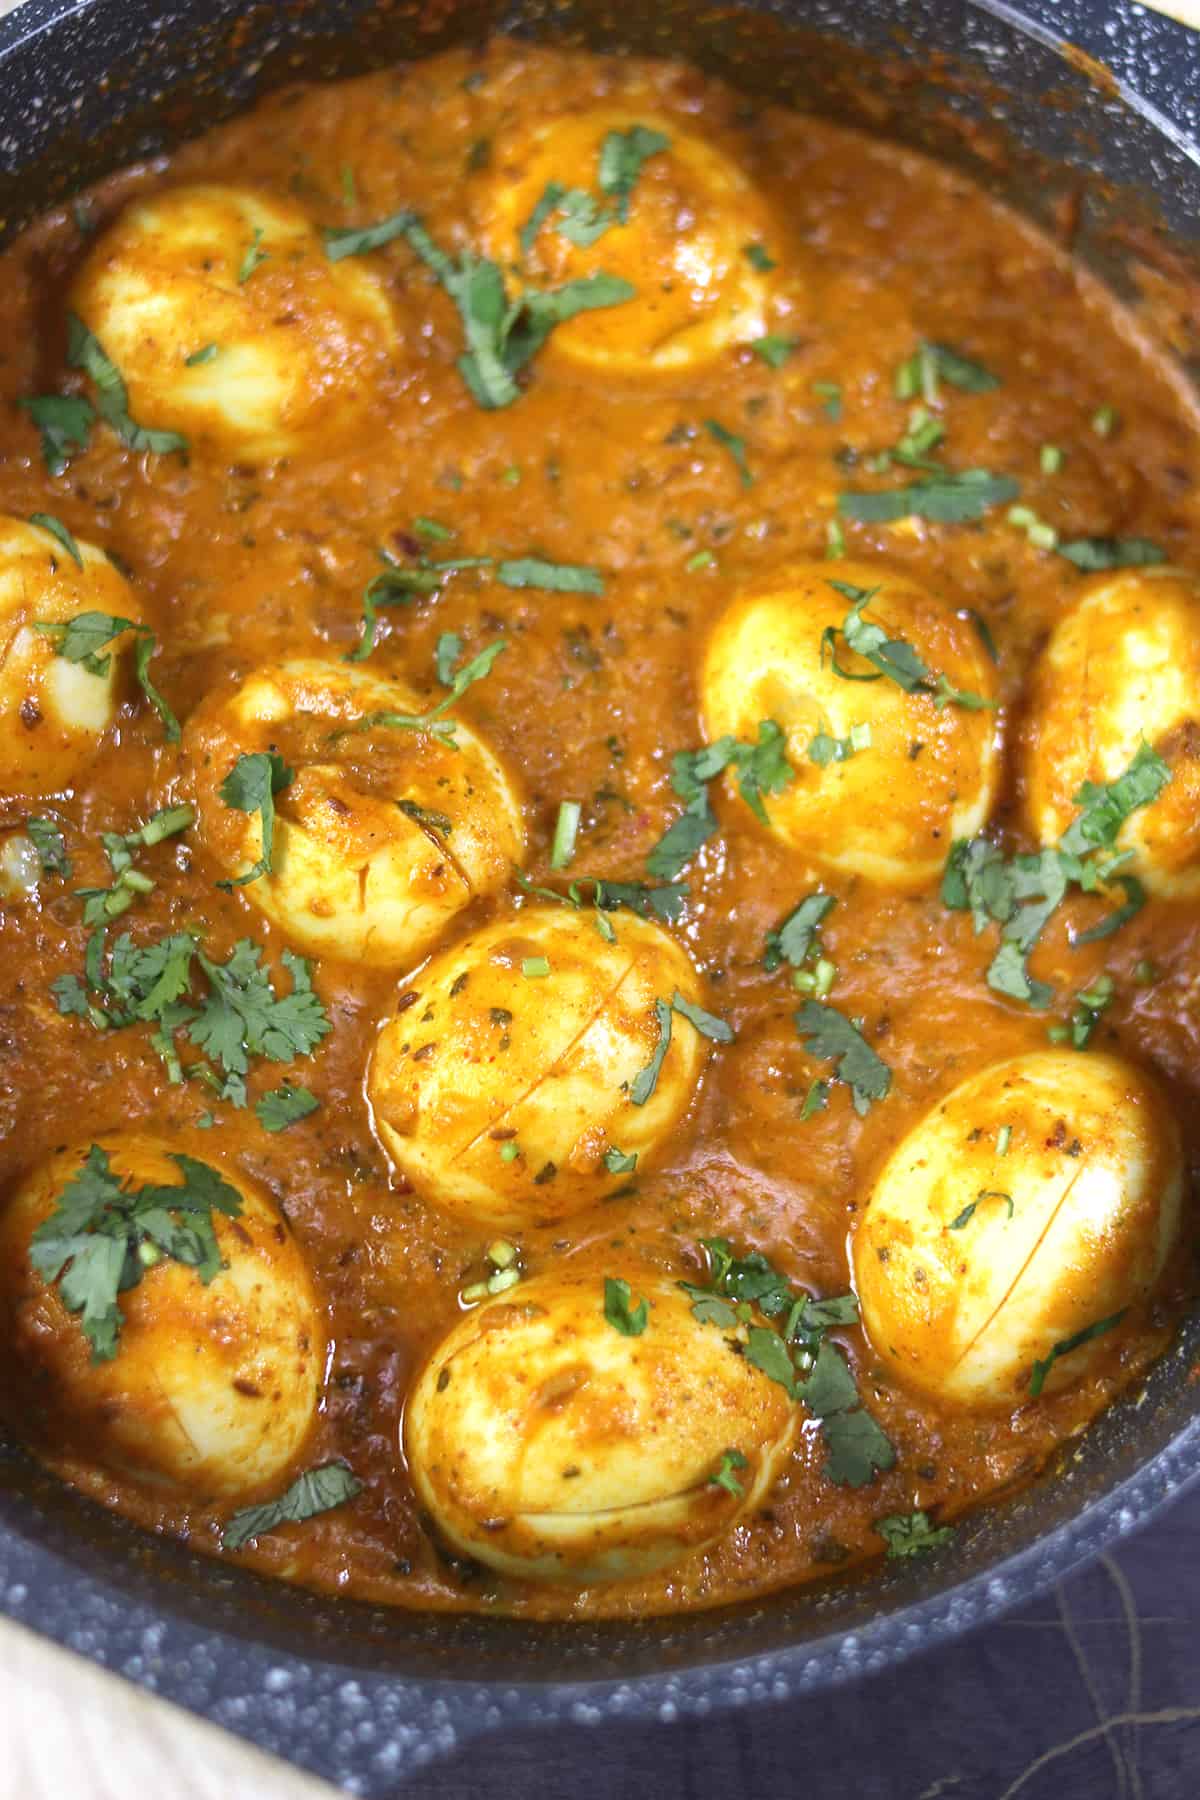 Simple egg curry recipe or egg masala for naan, roti, chapati, paratha, steamed rice, etc. 